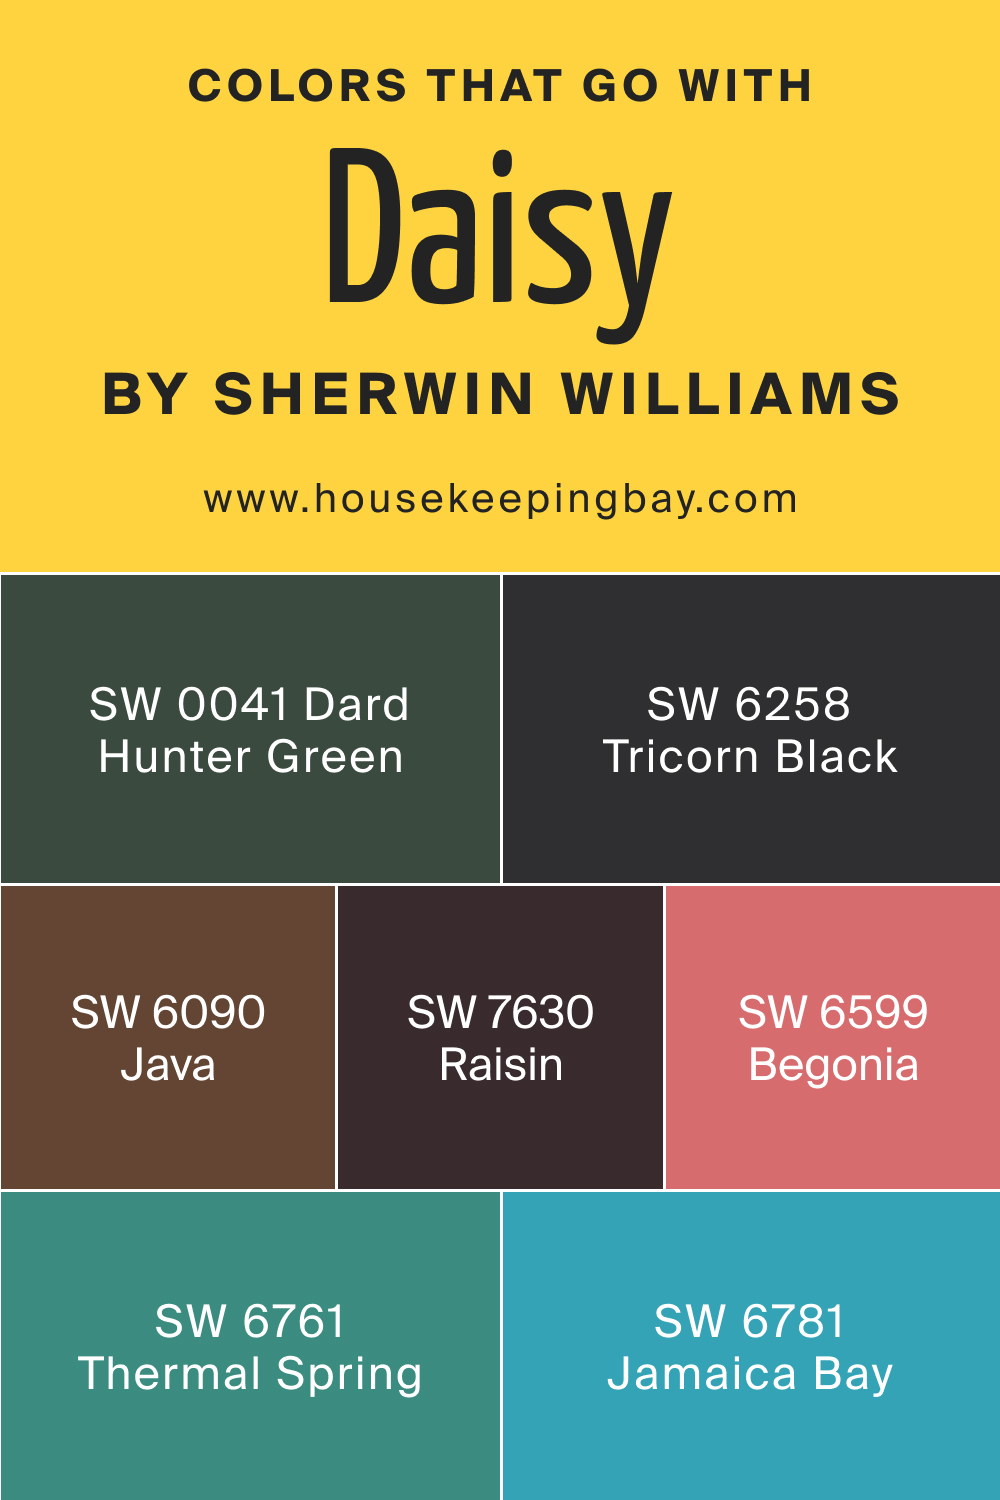 Colors that go with Daisy SW 6910 by Sherwin Williams